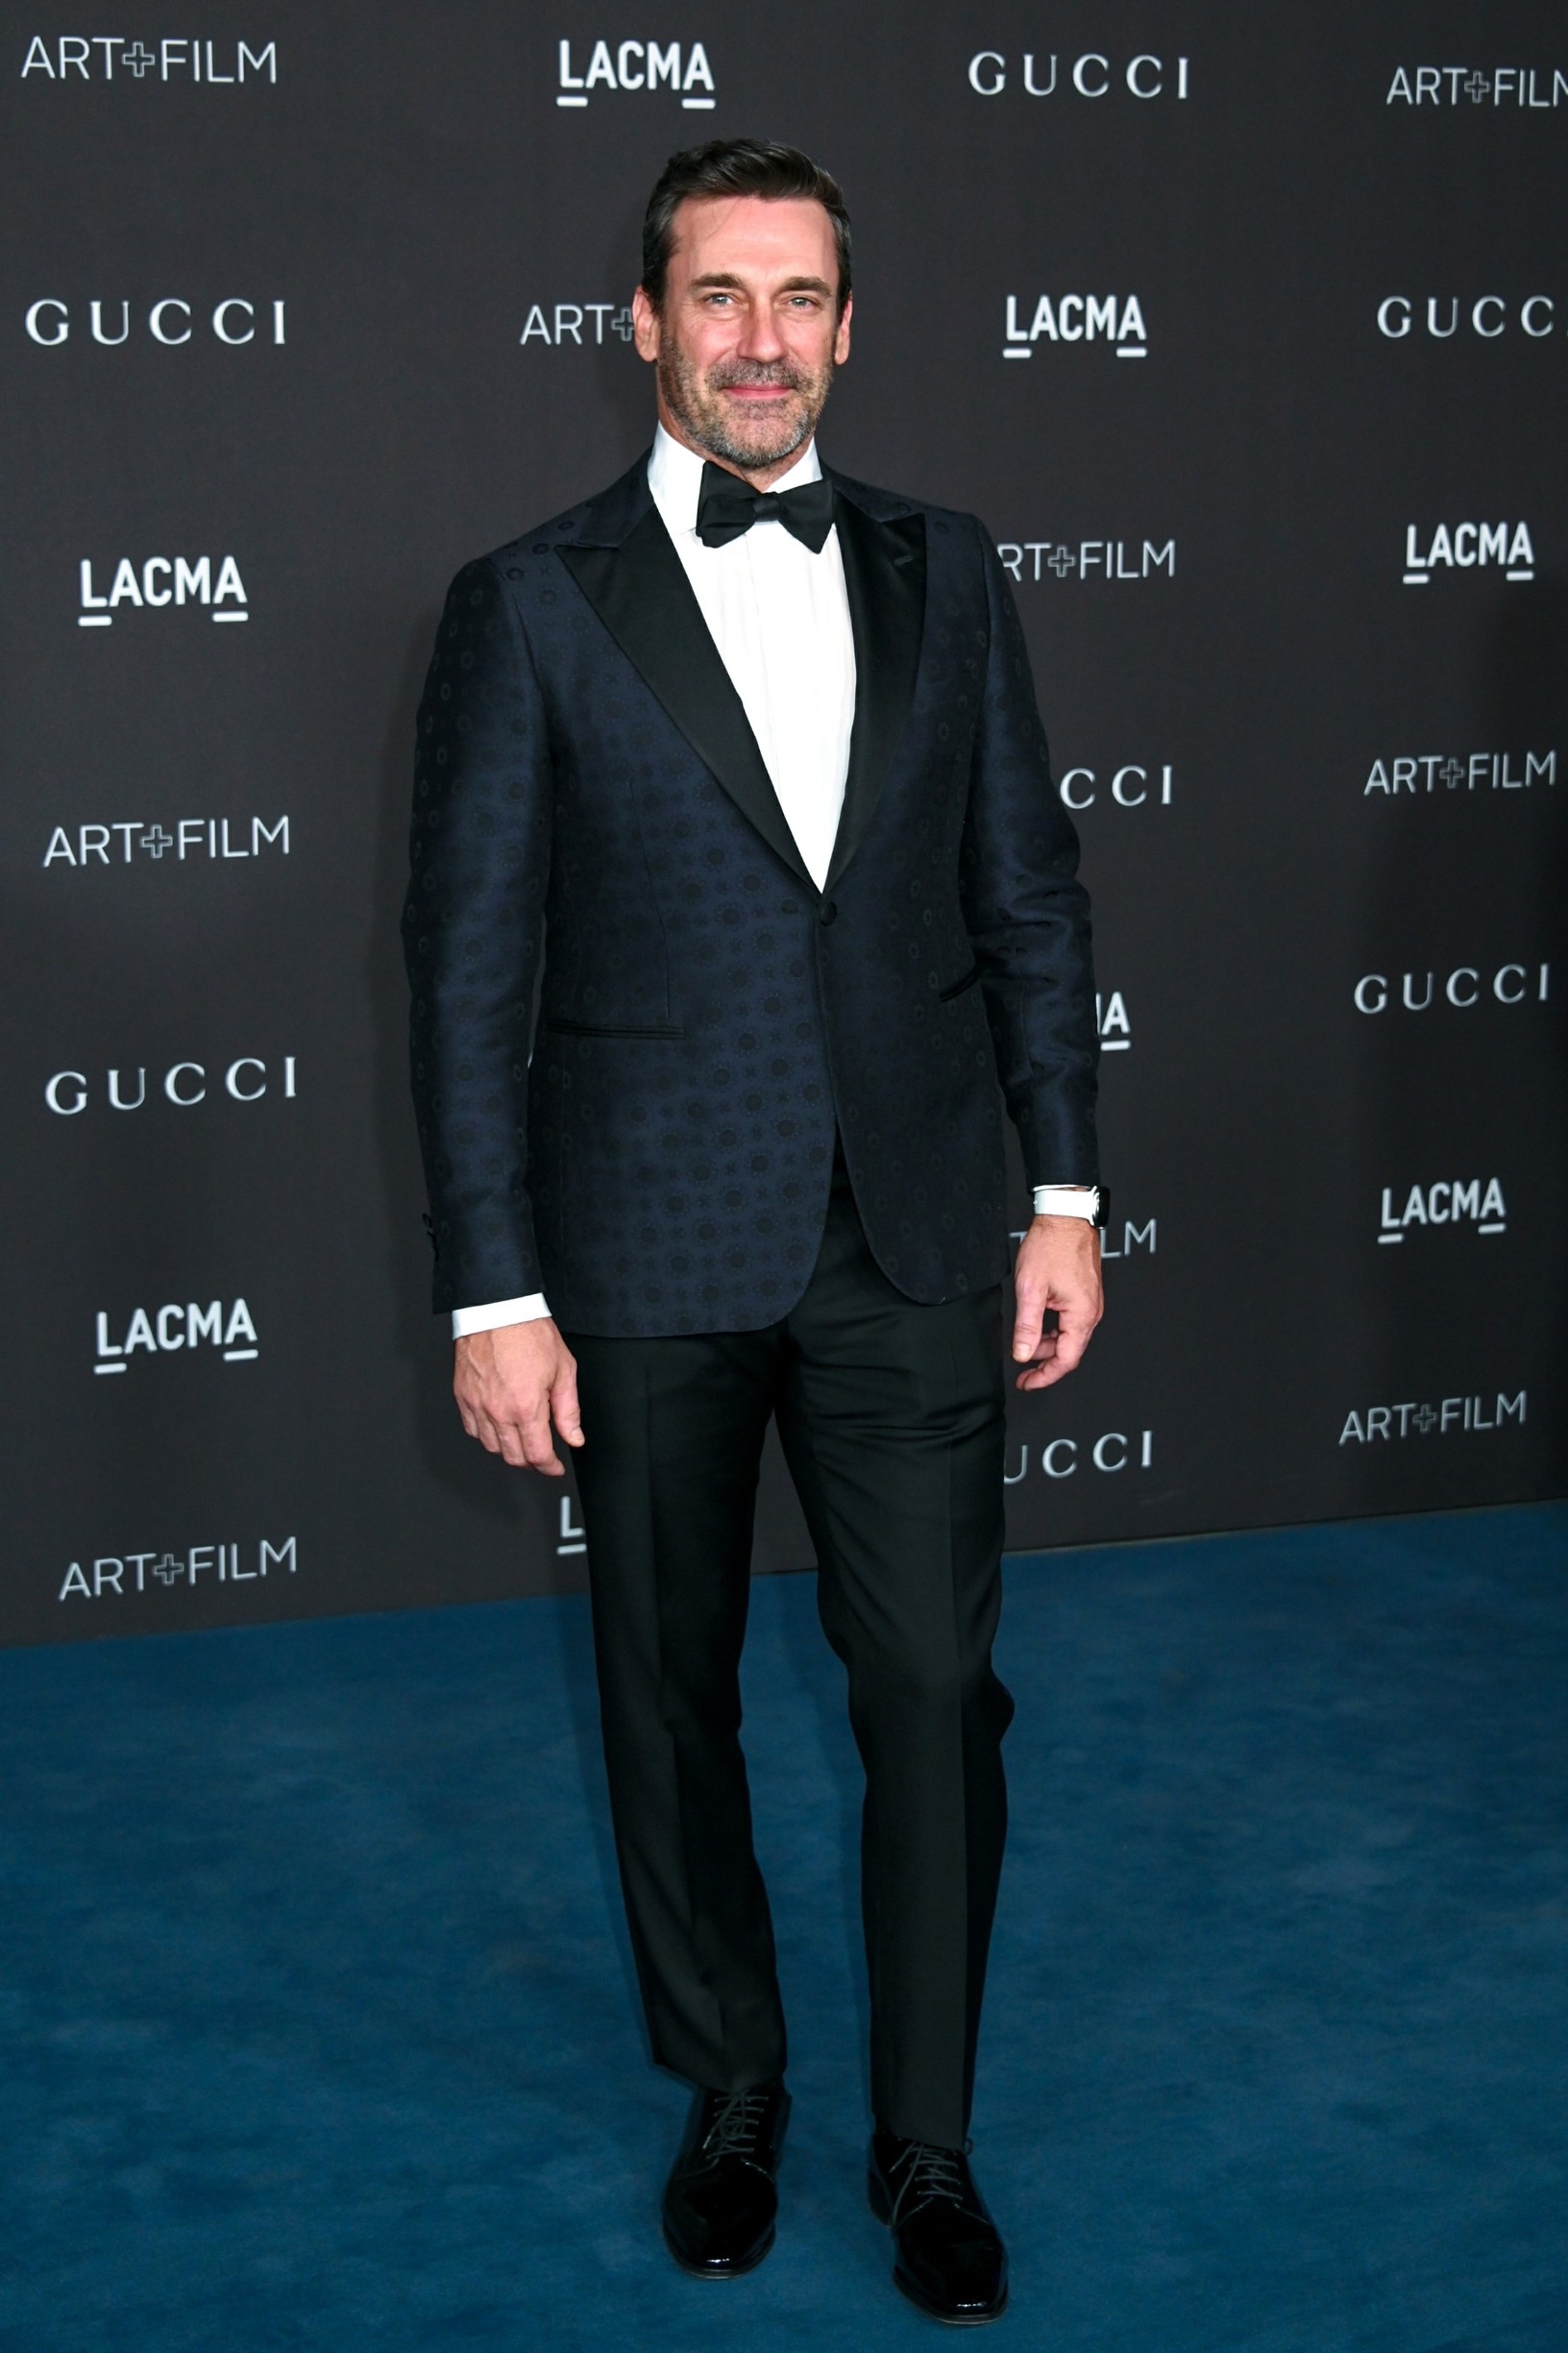 , Los Angeles, CA - 20191102 Celebrities pose for pictures as they arrive at the 2019 LACMA Art + Film Gala.

-PICTURED: John Hamm
-,Image: 480818963, License: Rights-managed, Restrictions: , Model Release: no, Credit line: JENNIFER GRAYLOCK / INSTAR Images / Profimedia